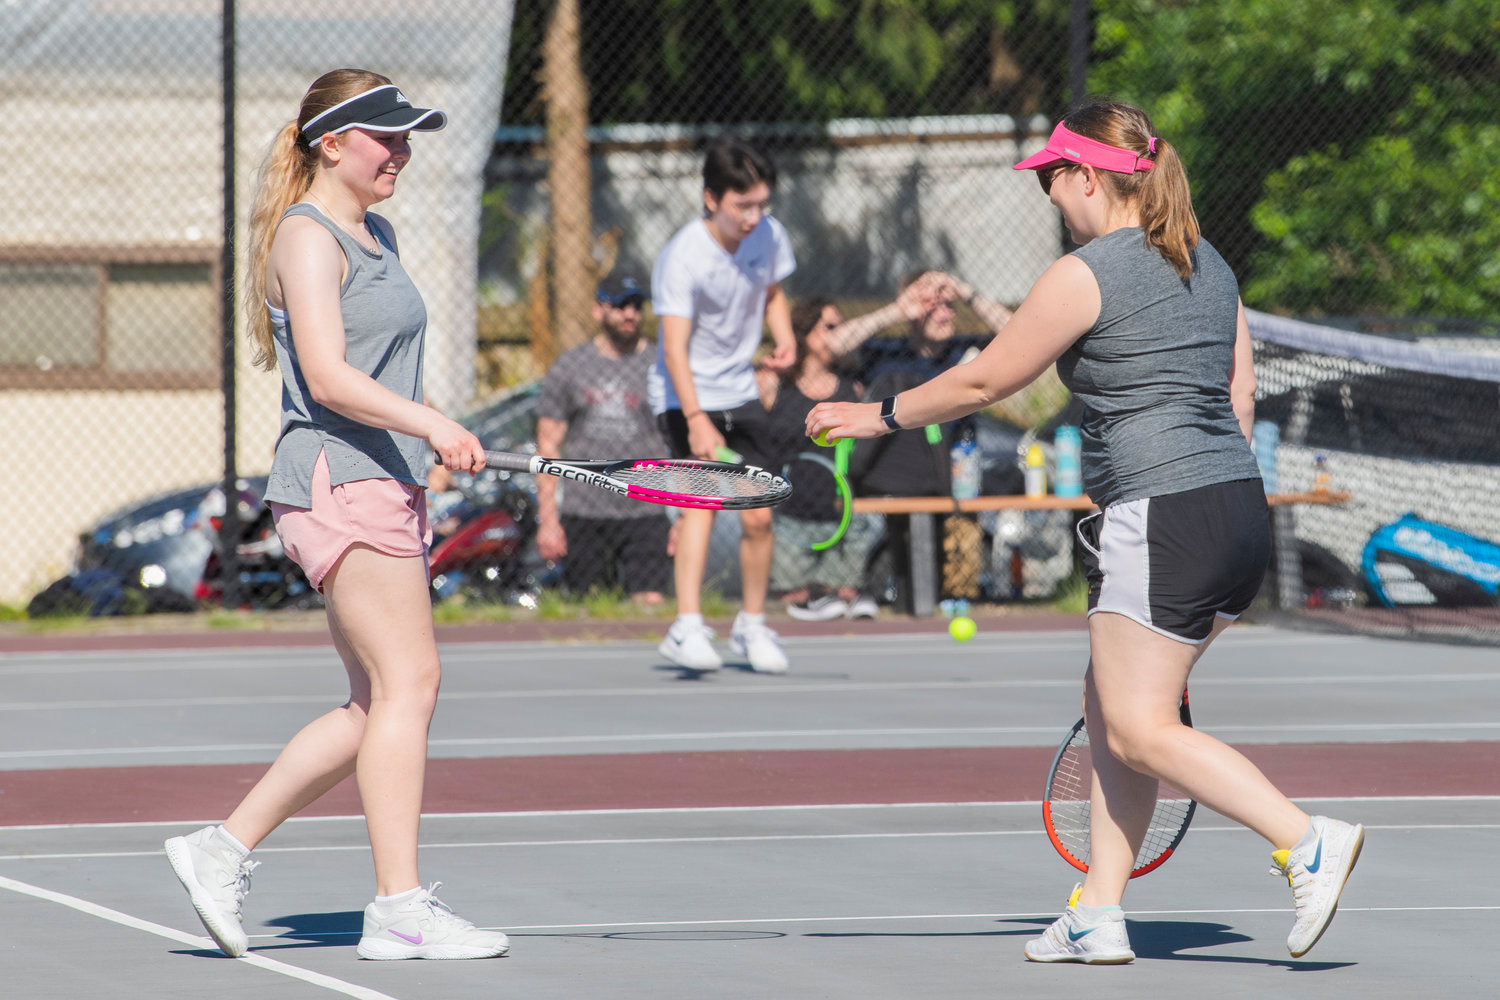 Emma Lund smiles and hands Alex Norris, a Centralia graduate, a ball while playing during the Jack State Tennis Tournament at W.F. West High School on Saturday.